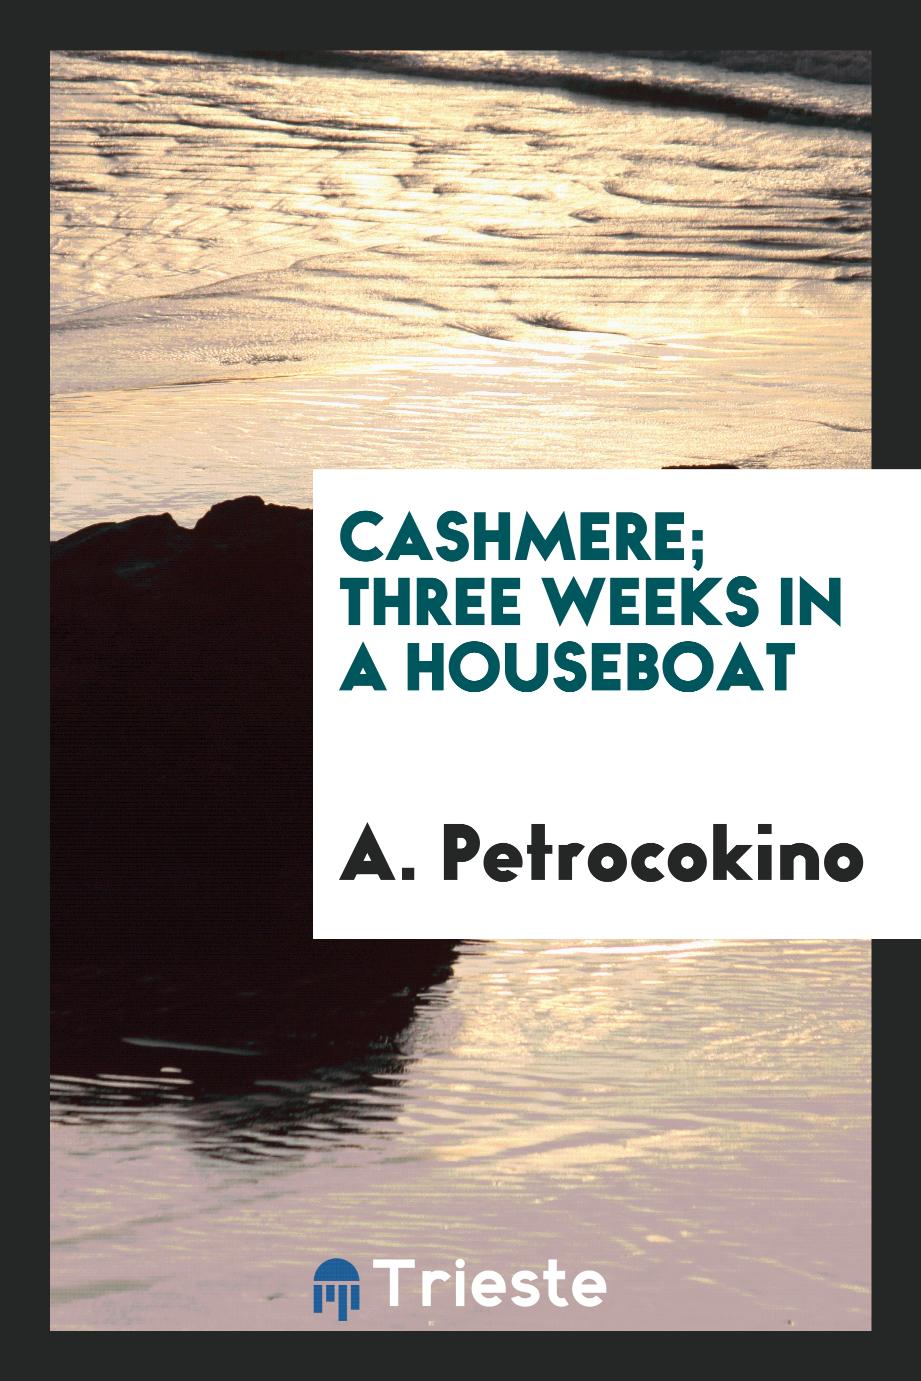 Cashmere; three weeks in a houseboat